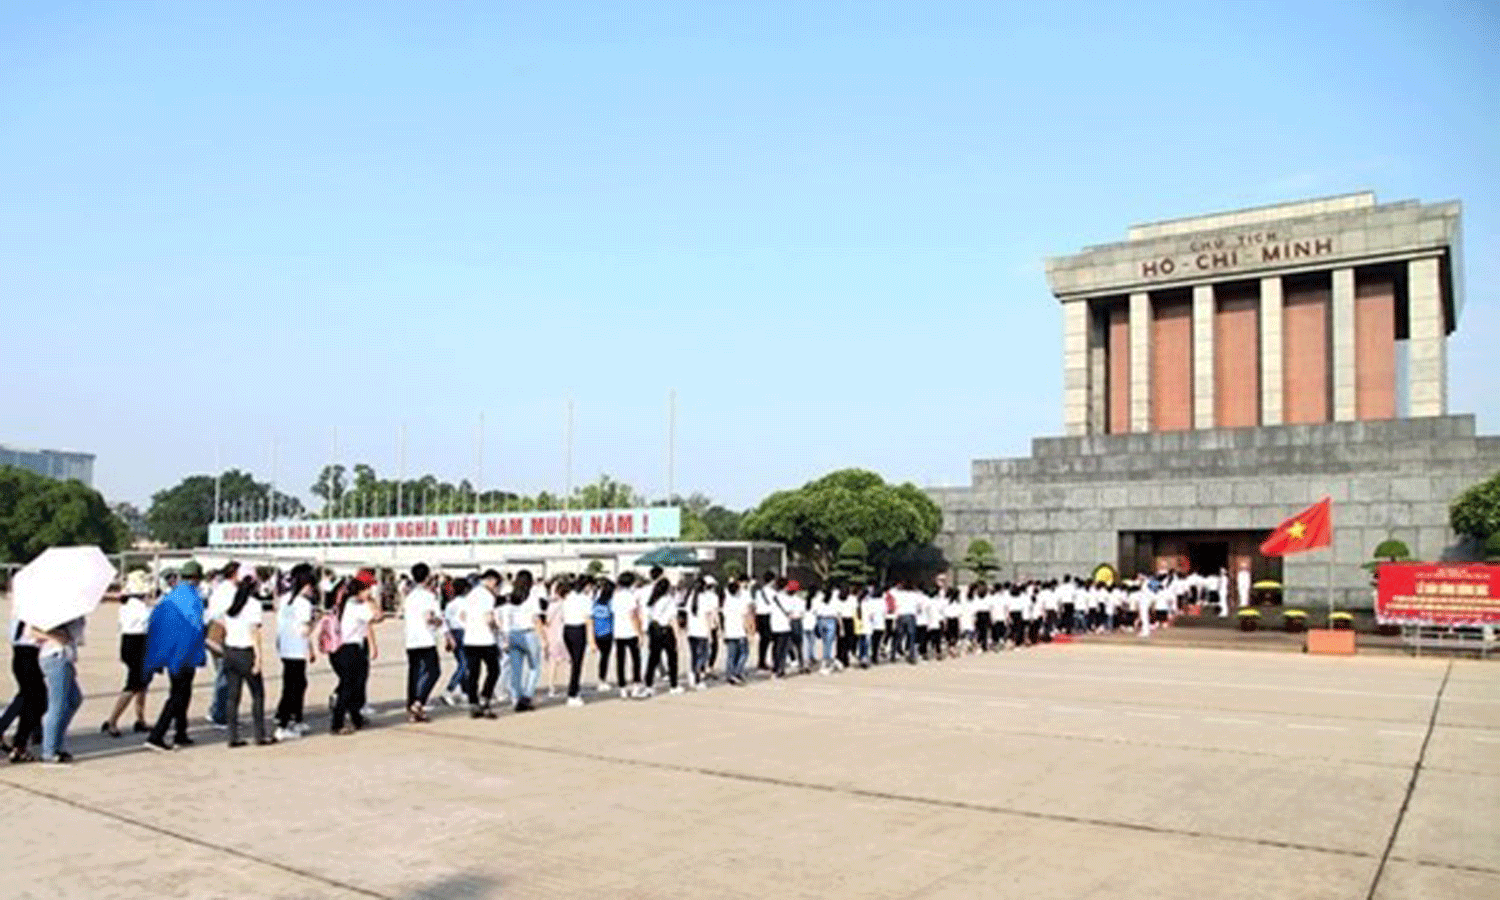 People visit the mausoleum to pay tribute to President Ho Chi Minh in Hanoi. (Photo: VNA).